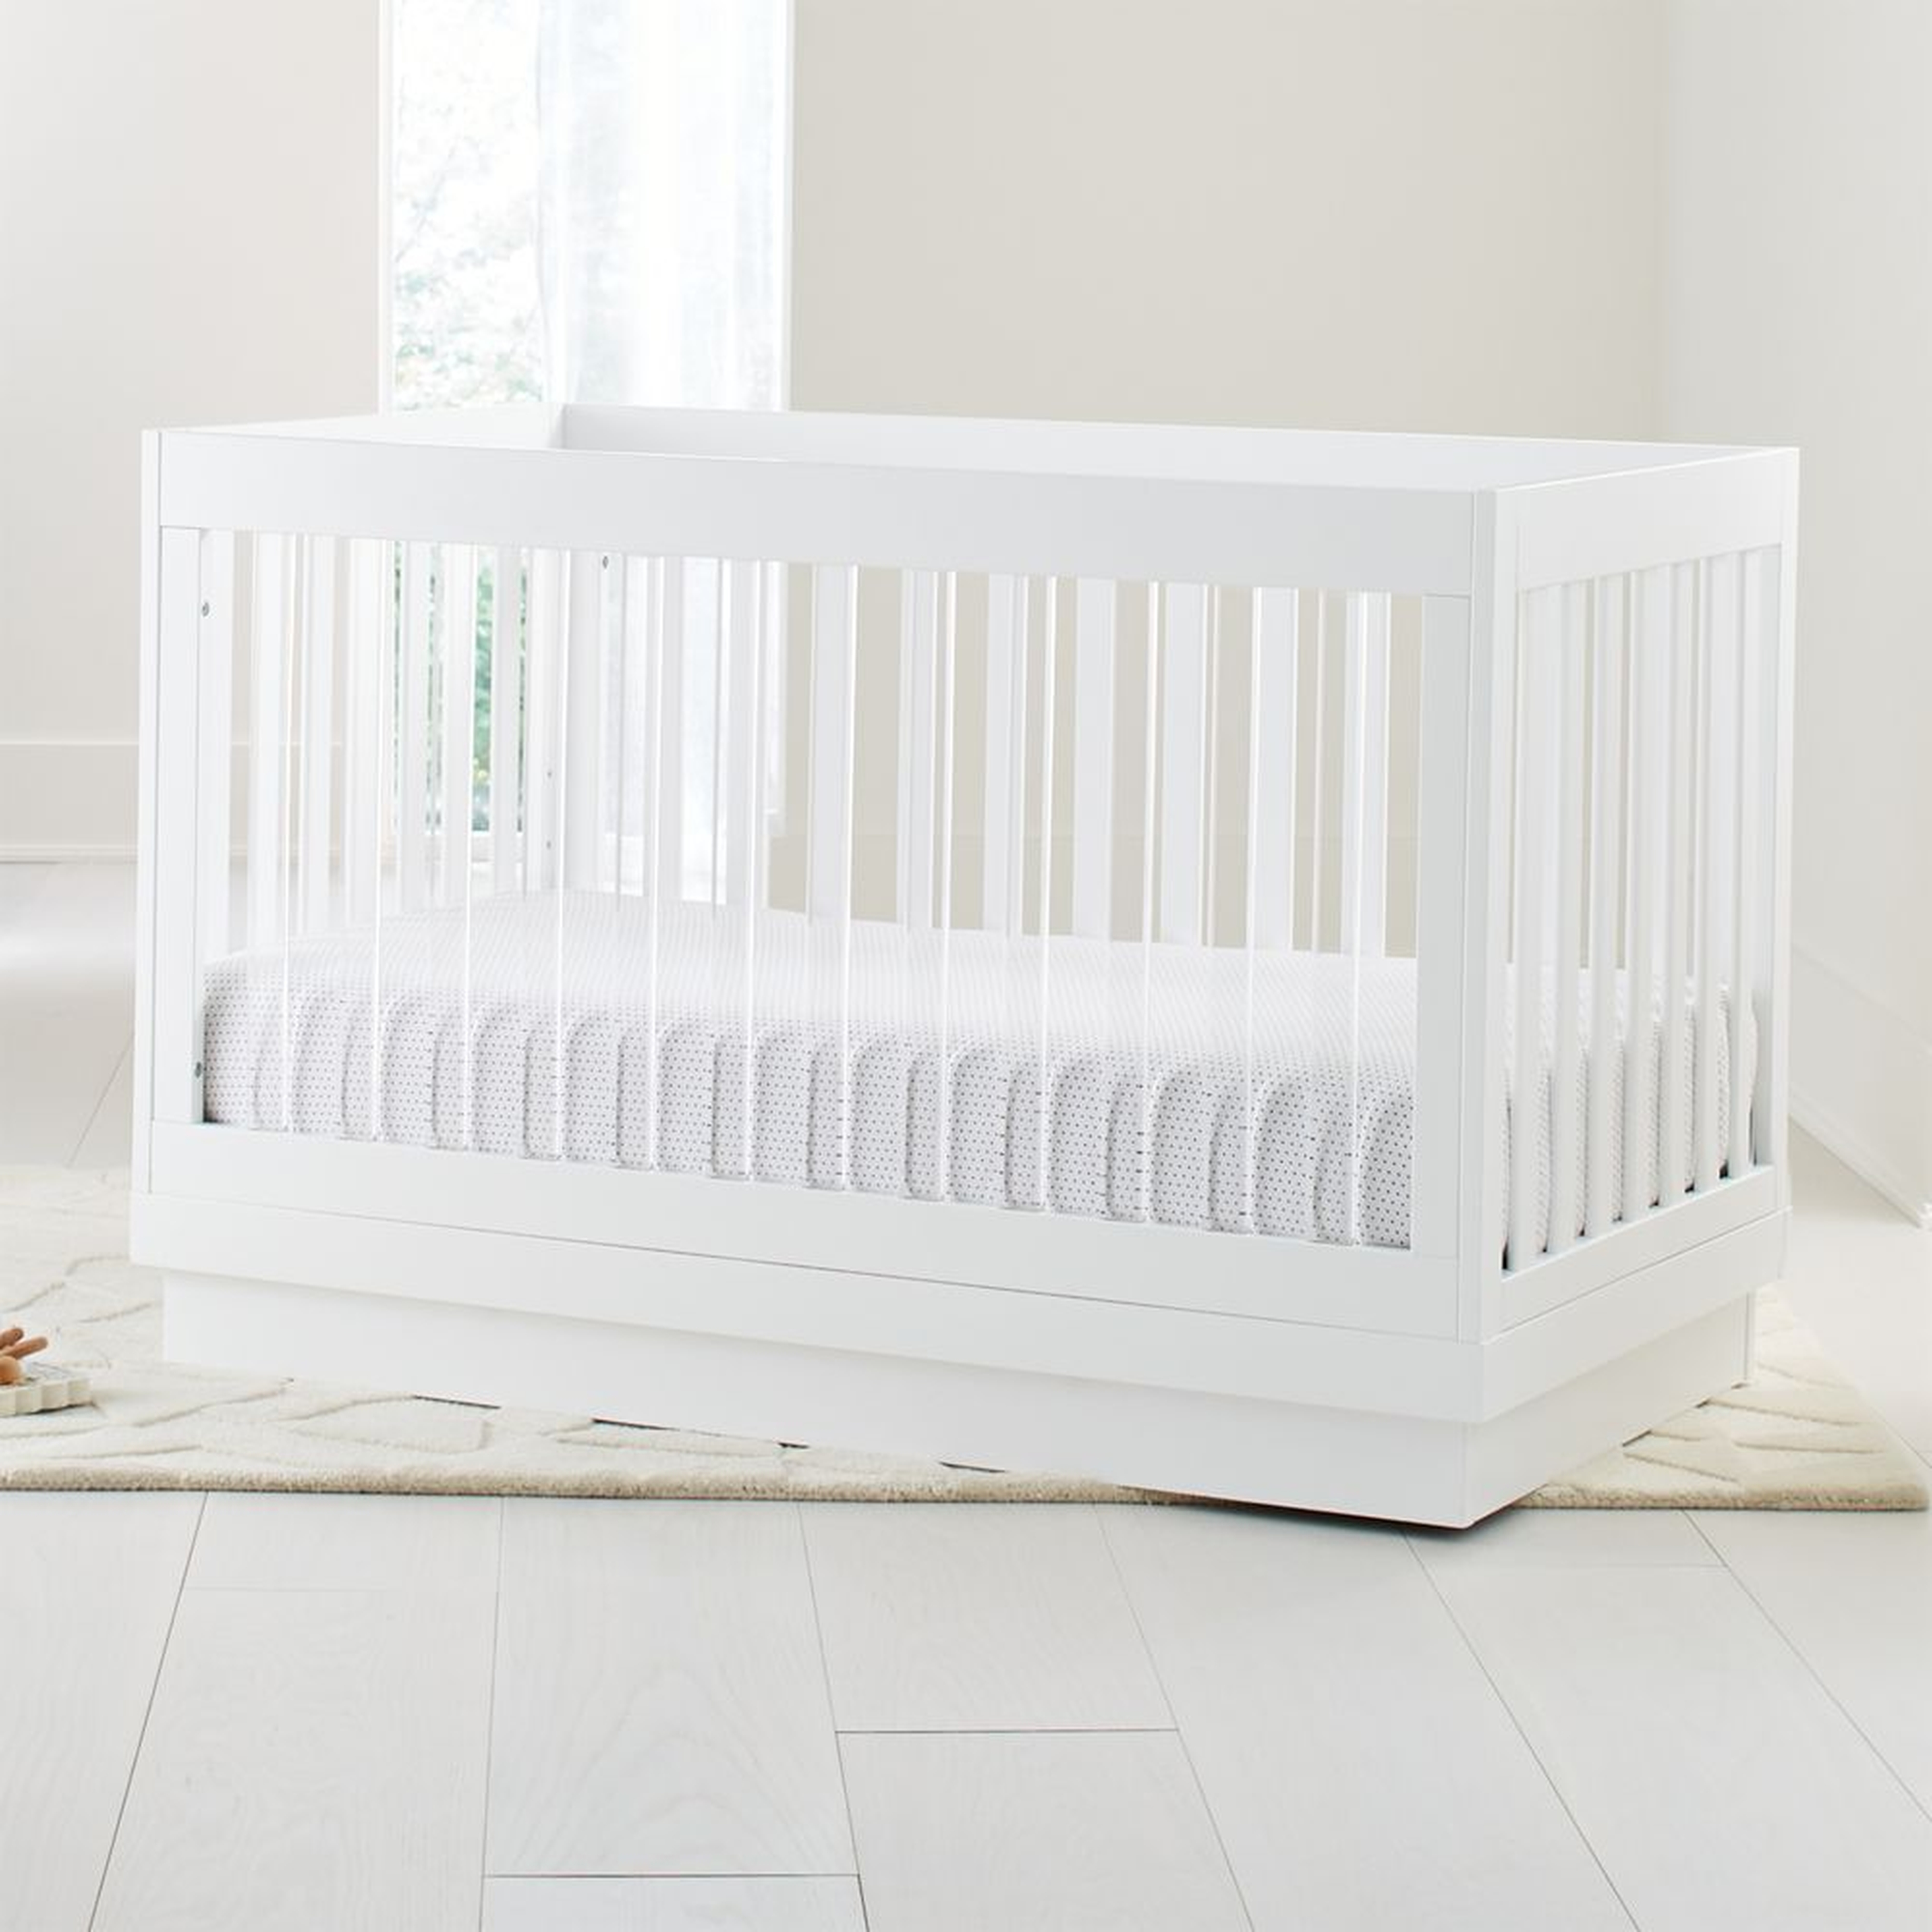 Babyletto Harlow White Acrylic 3-in-1 Convertible Baby Crib with Toddler Bed Conversion Kit - Crate and Barrel